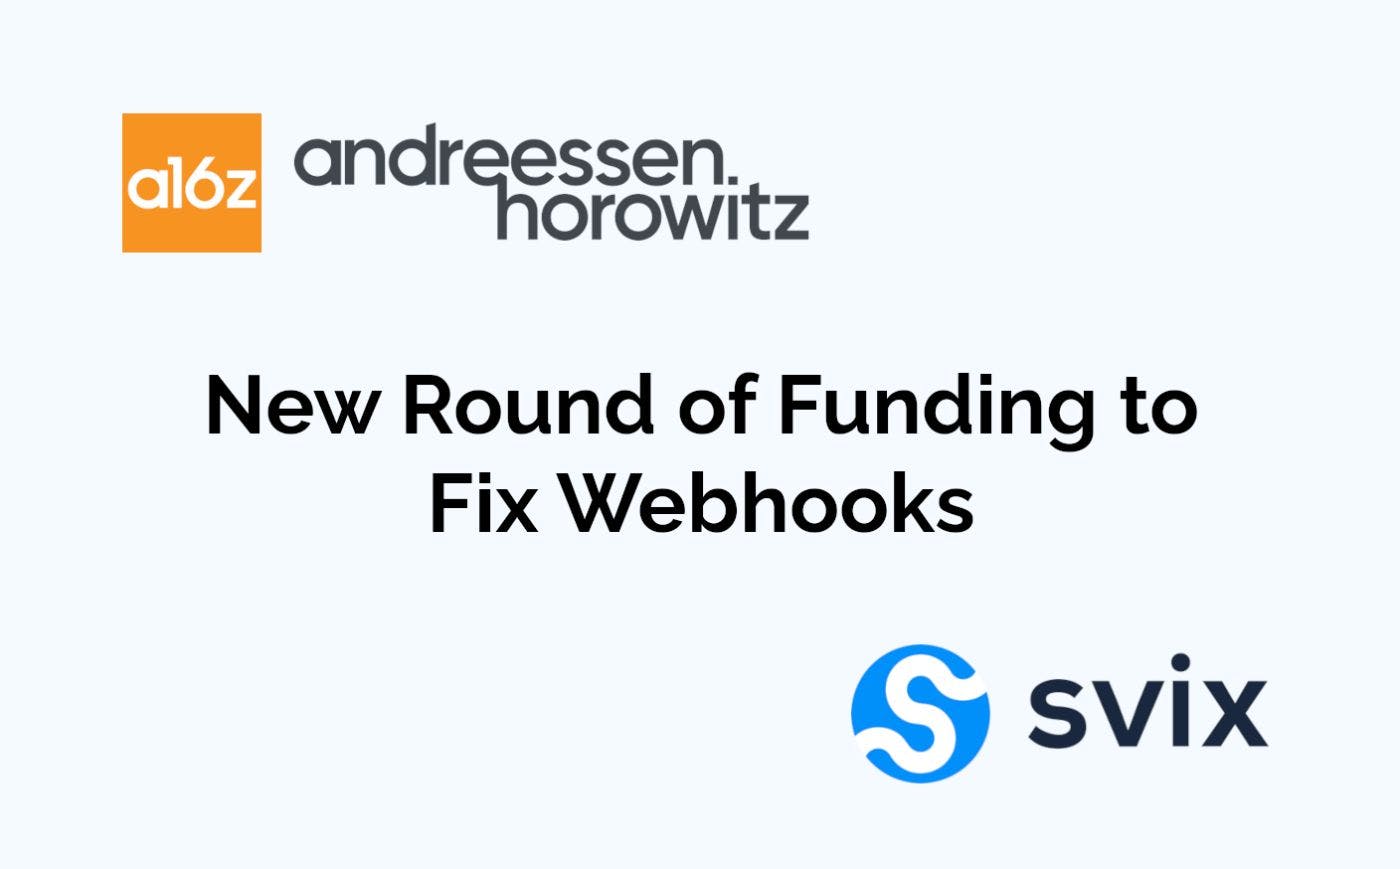 featured image - How My Startup Got New Funding from Andreessen Horowitz